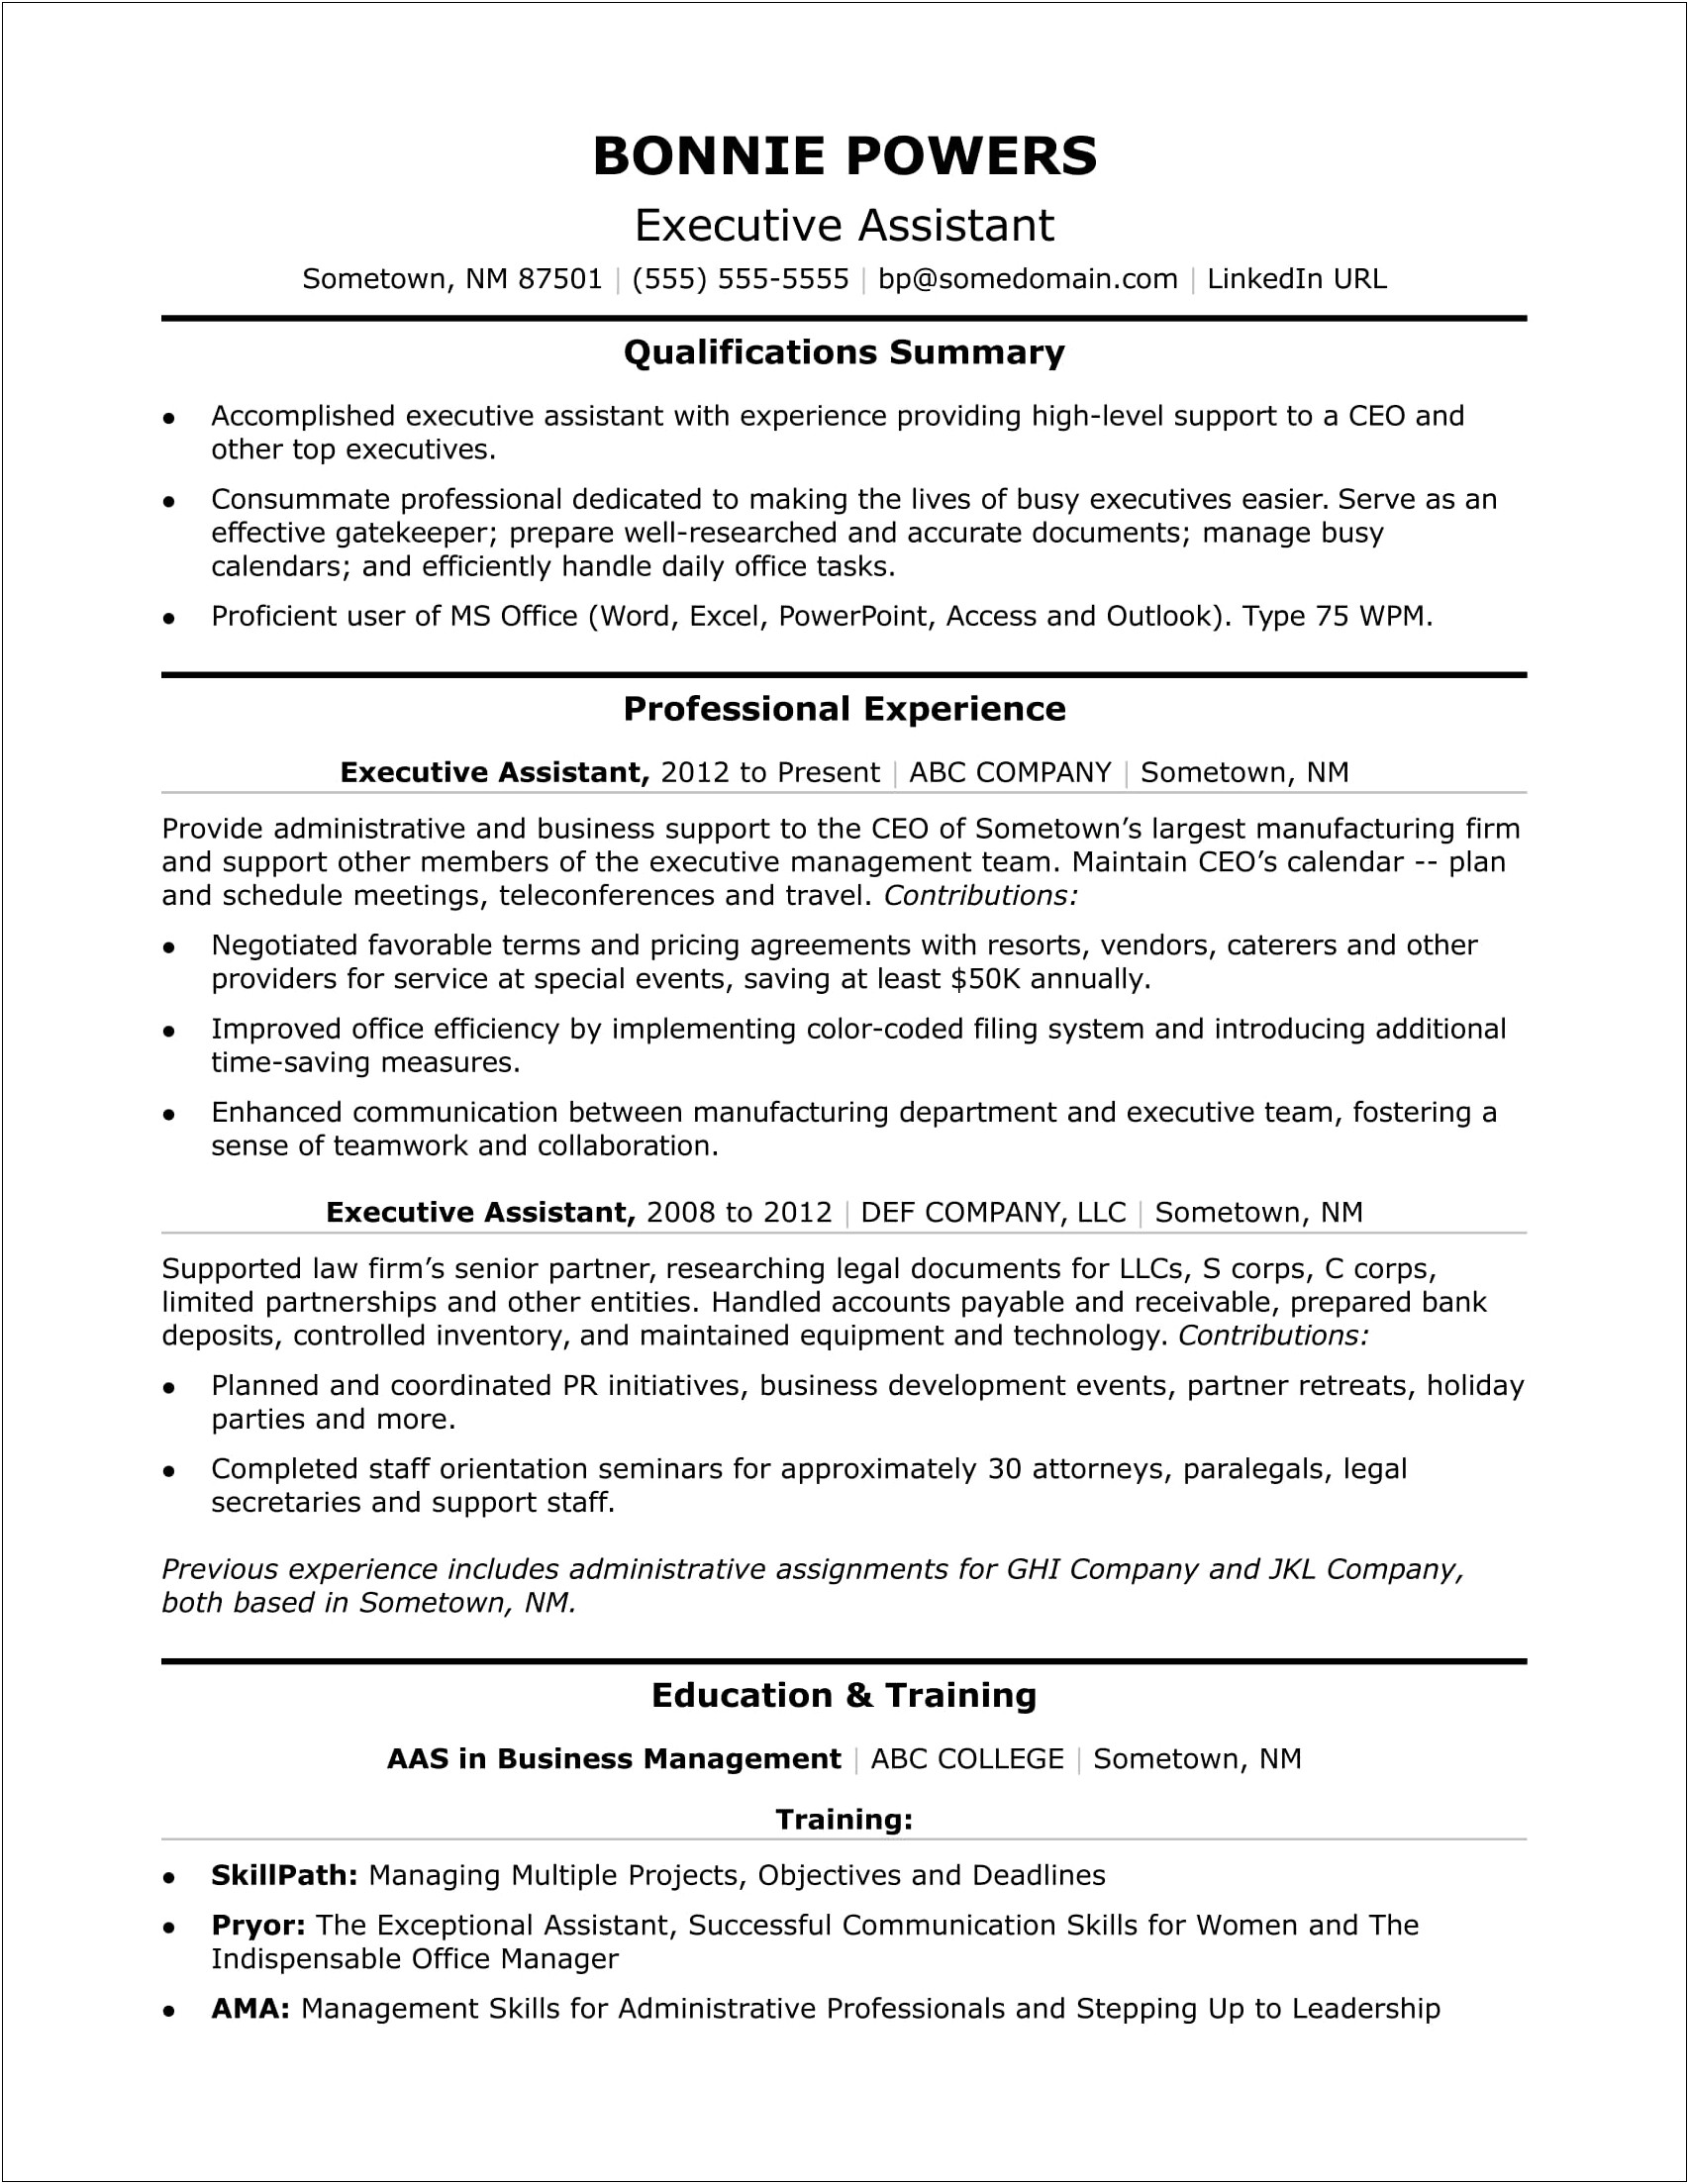 Summary On Resume For Executive Assistant